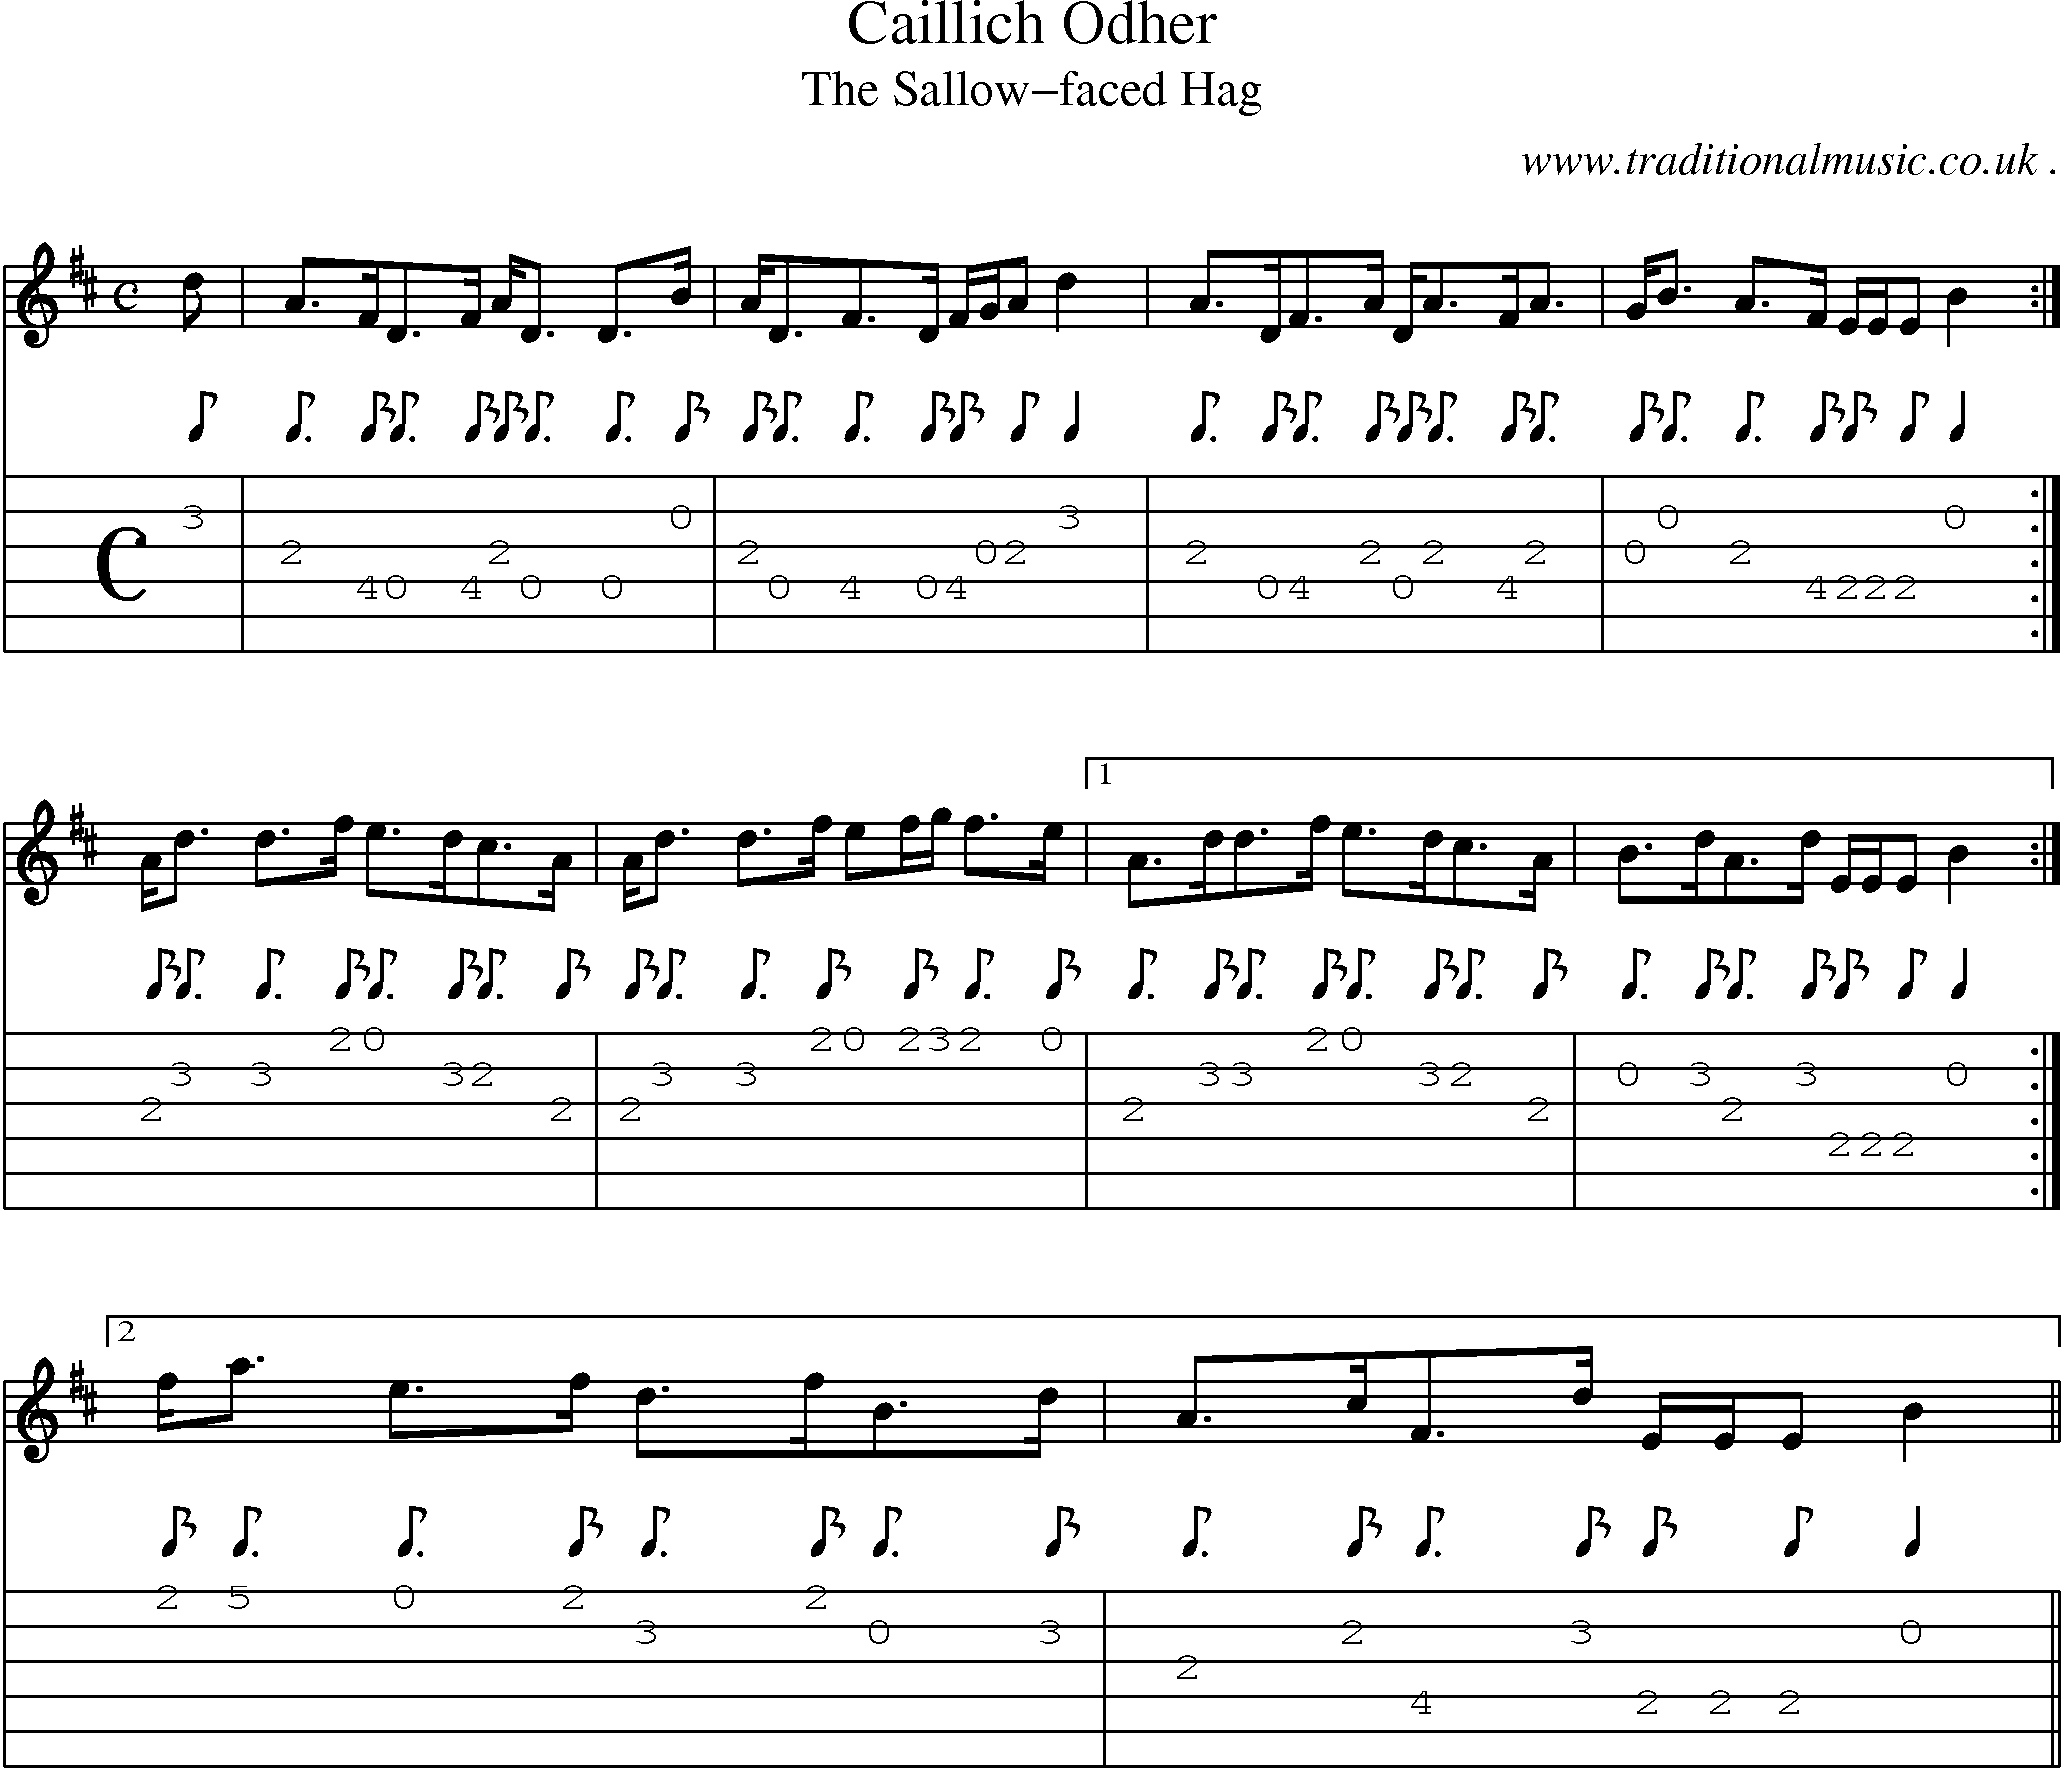 Sheet-music  score, Chords and Guitar Tabs for Caillich Odher